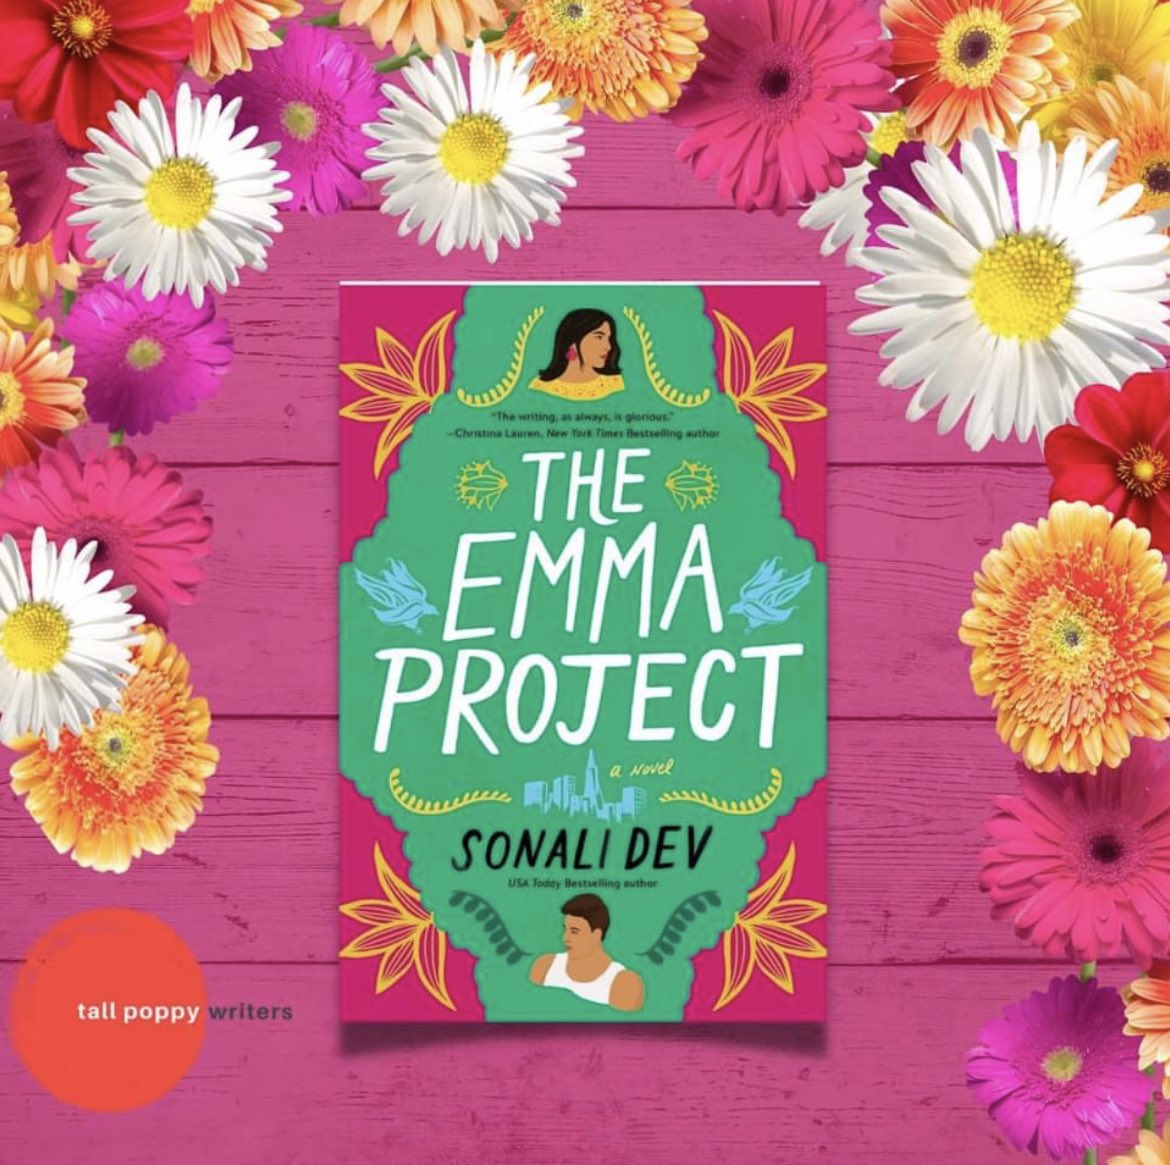 Sending congrats to @Sonali_Dev on the latest triumph in her Rajes Series, THE EMMA PROJECT, out today‼️👍🏾👍🏻 We got our copy…how about you?! #tallpoppywriters #avonbooks #romcom #fabwomenwriters